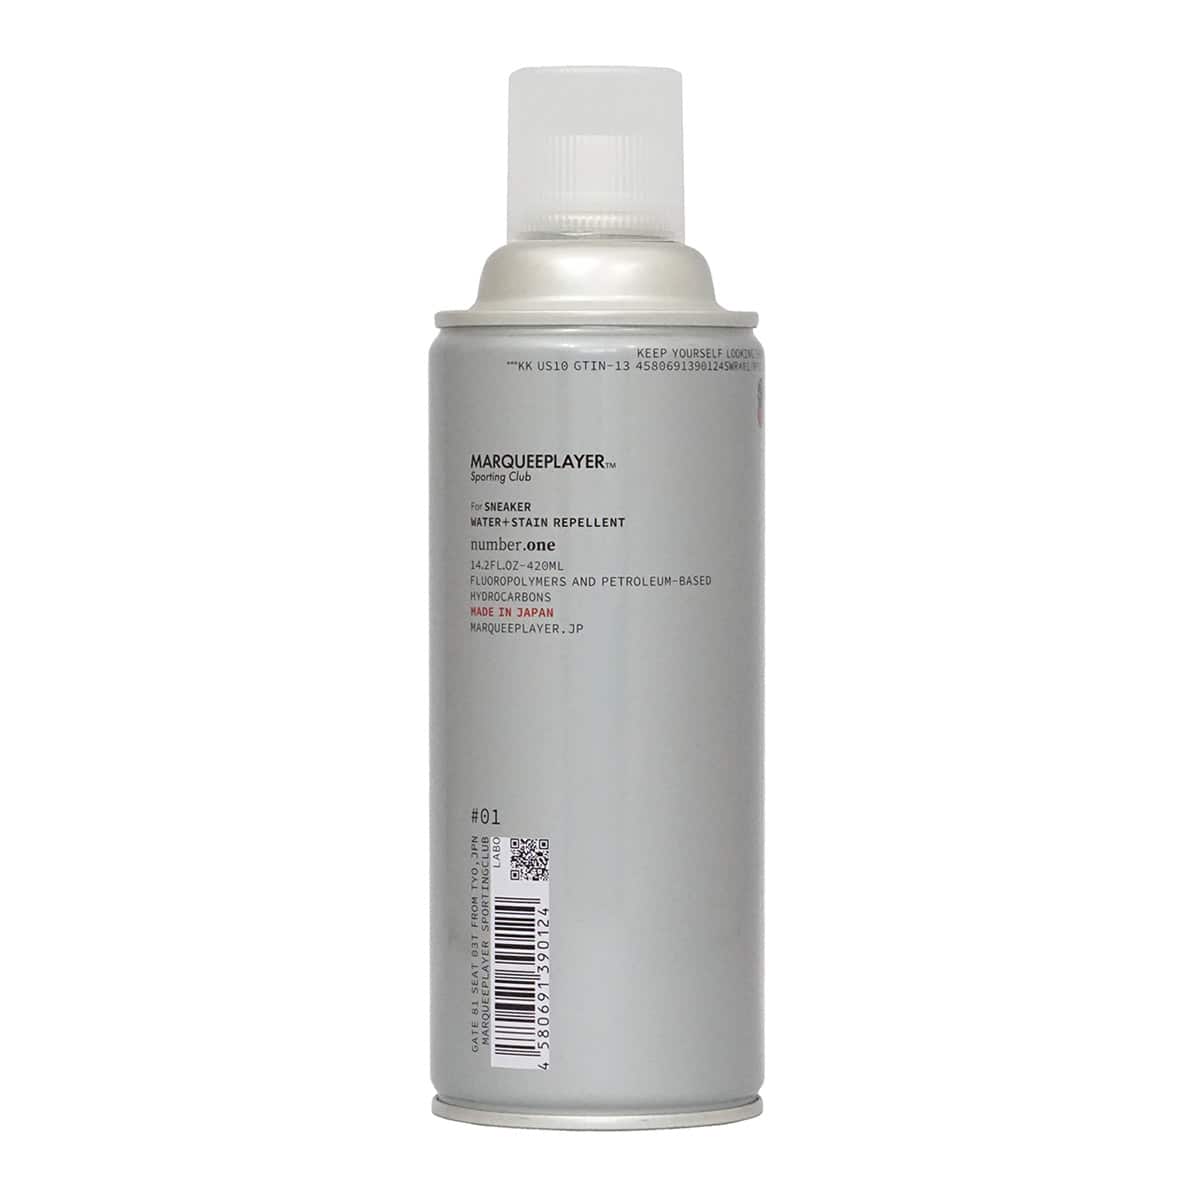 MARQUEE PLAYER For SNEAKER WATER+STAIN REPELLENT #01 22SS-I_photo_large